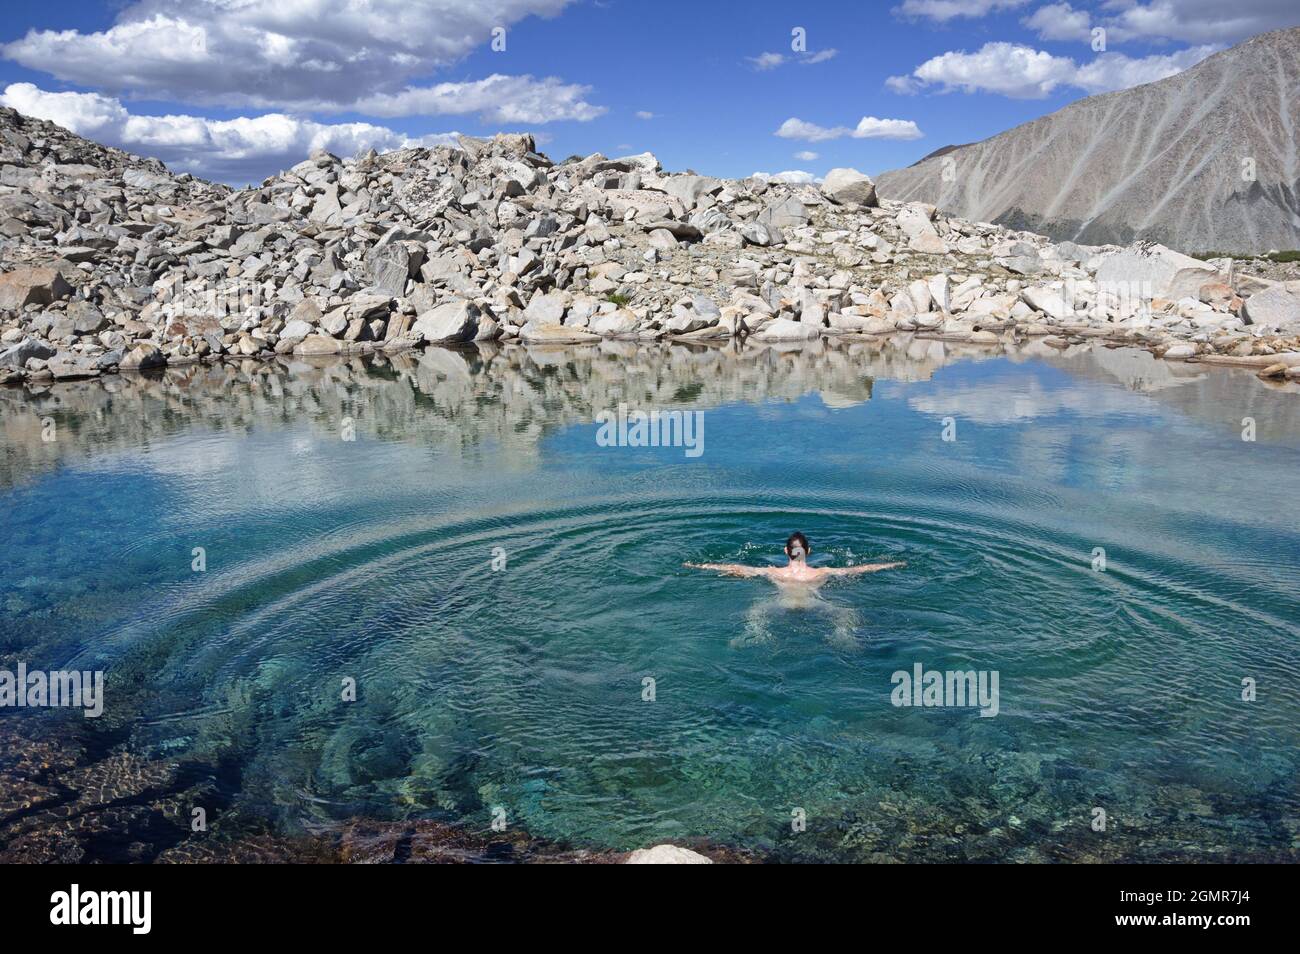 man swimming in a cool blue refreshing mountain pool surrounded by rocks Stock Photo